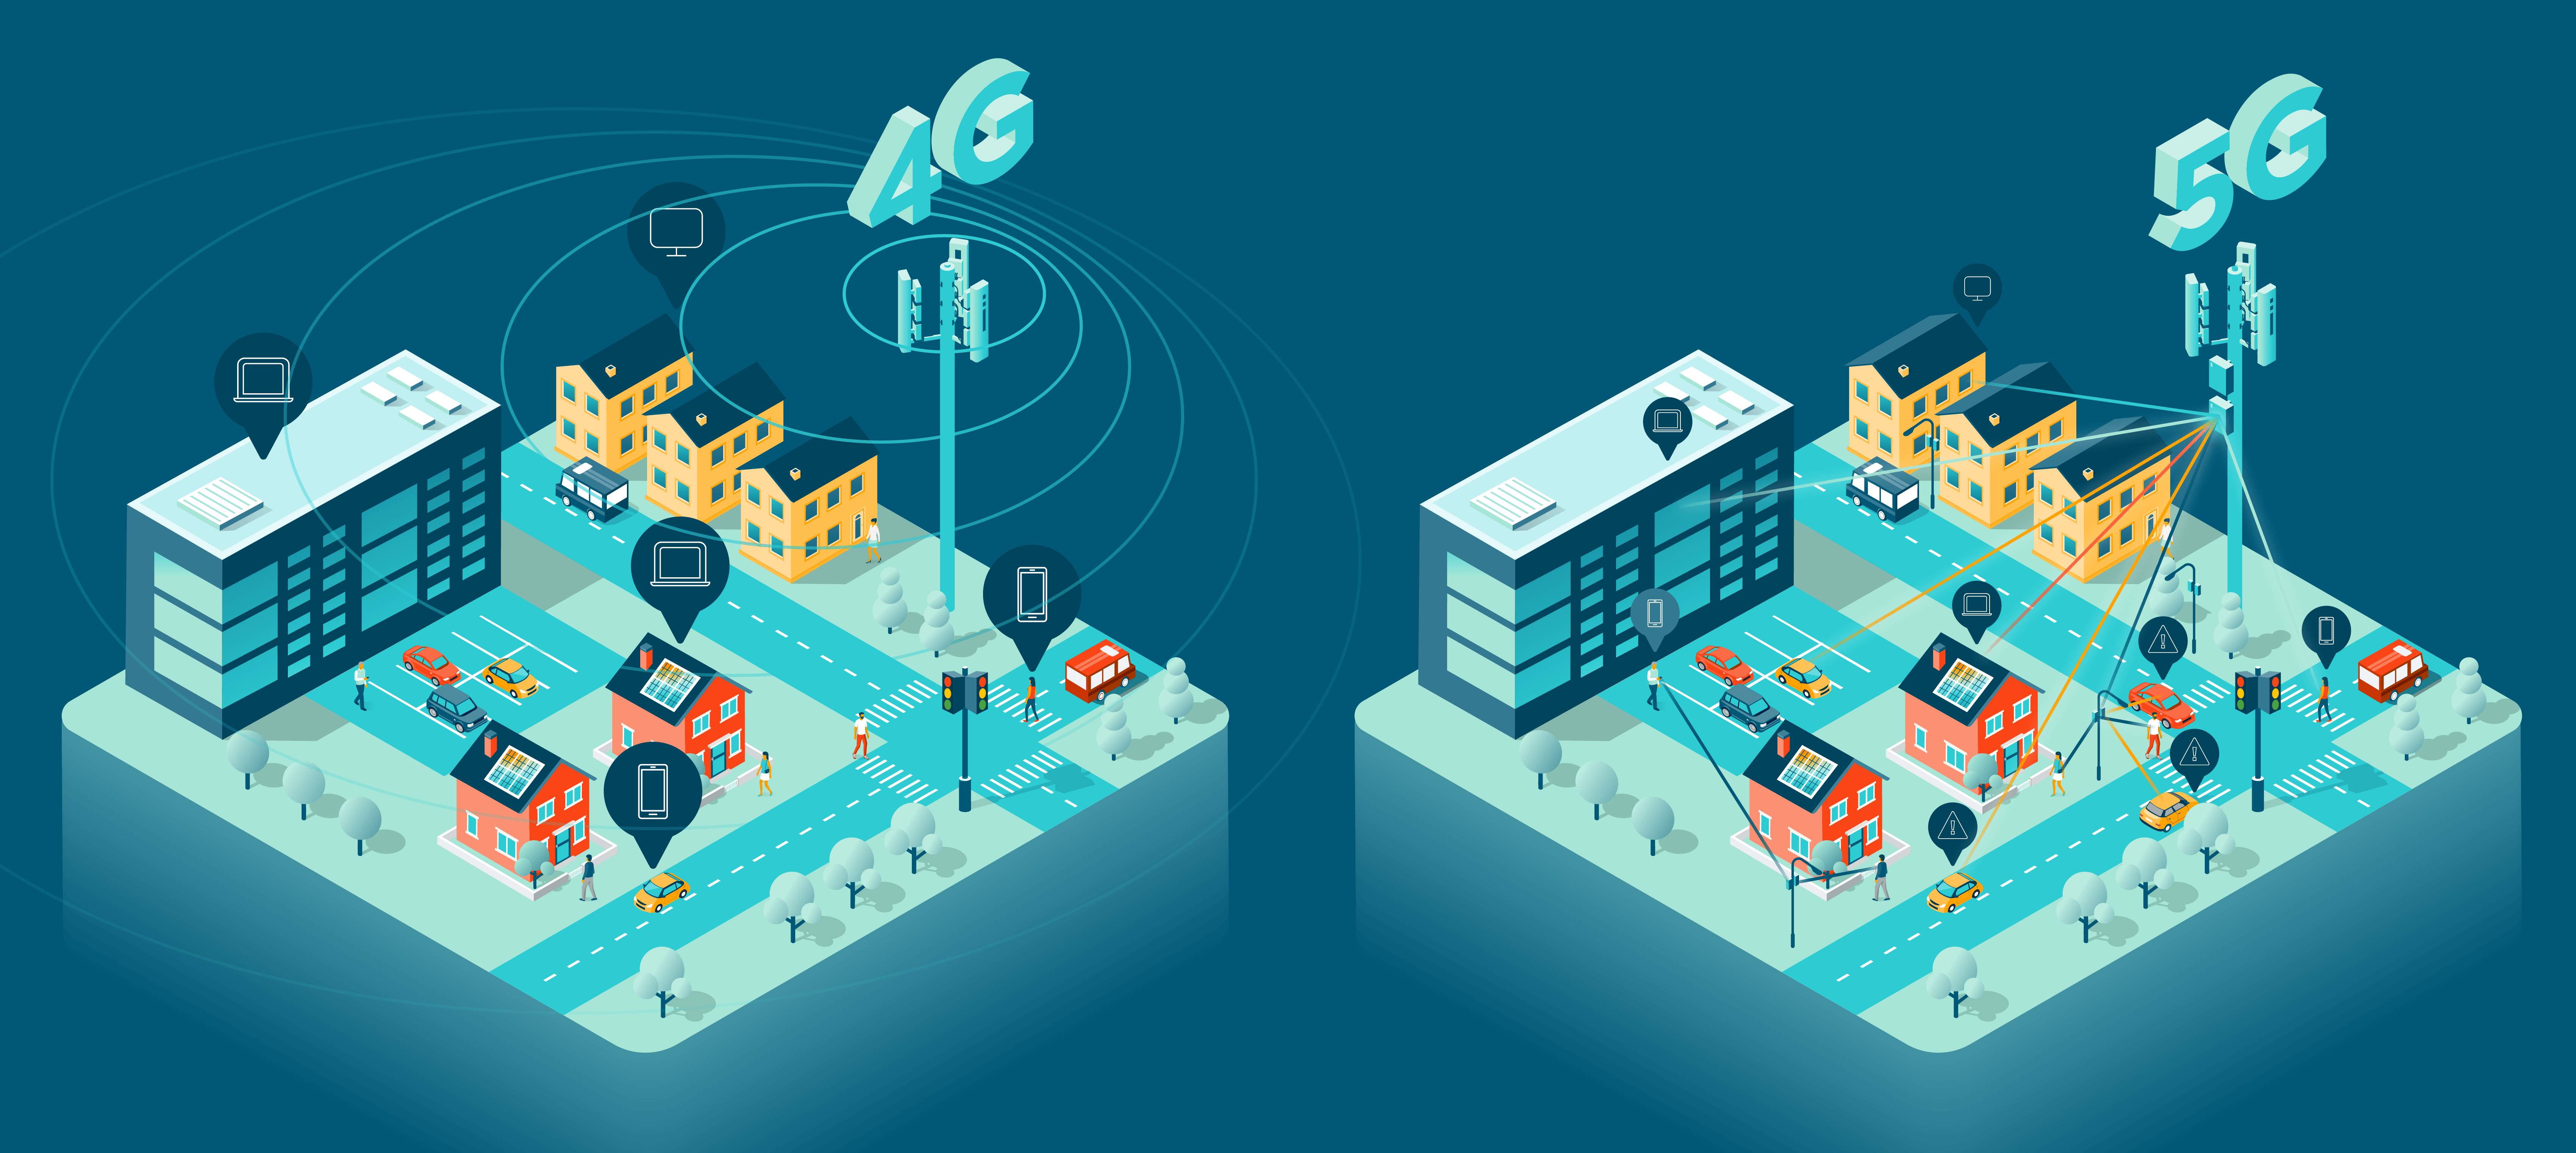 An infographic visually comparing 4G and 5G waves.